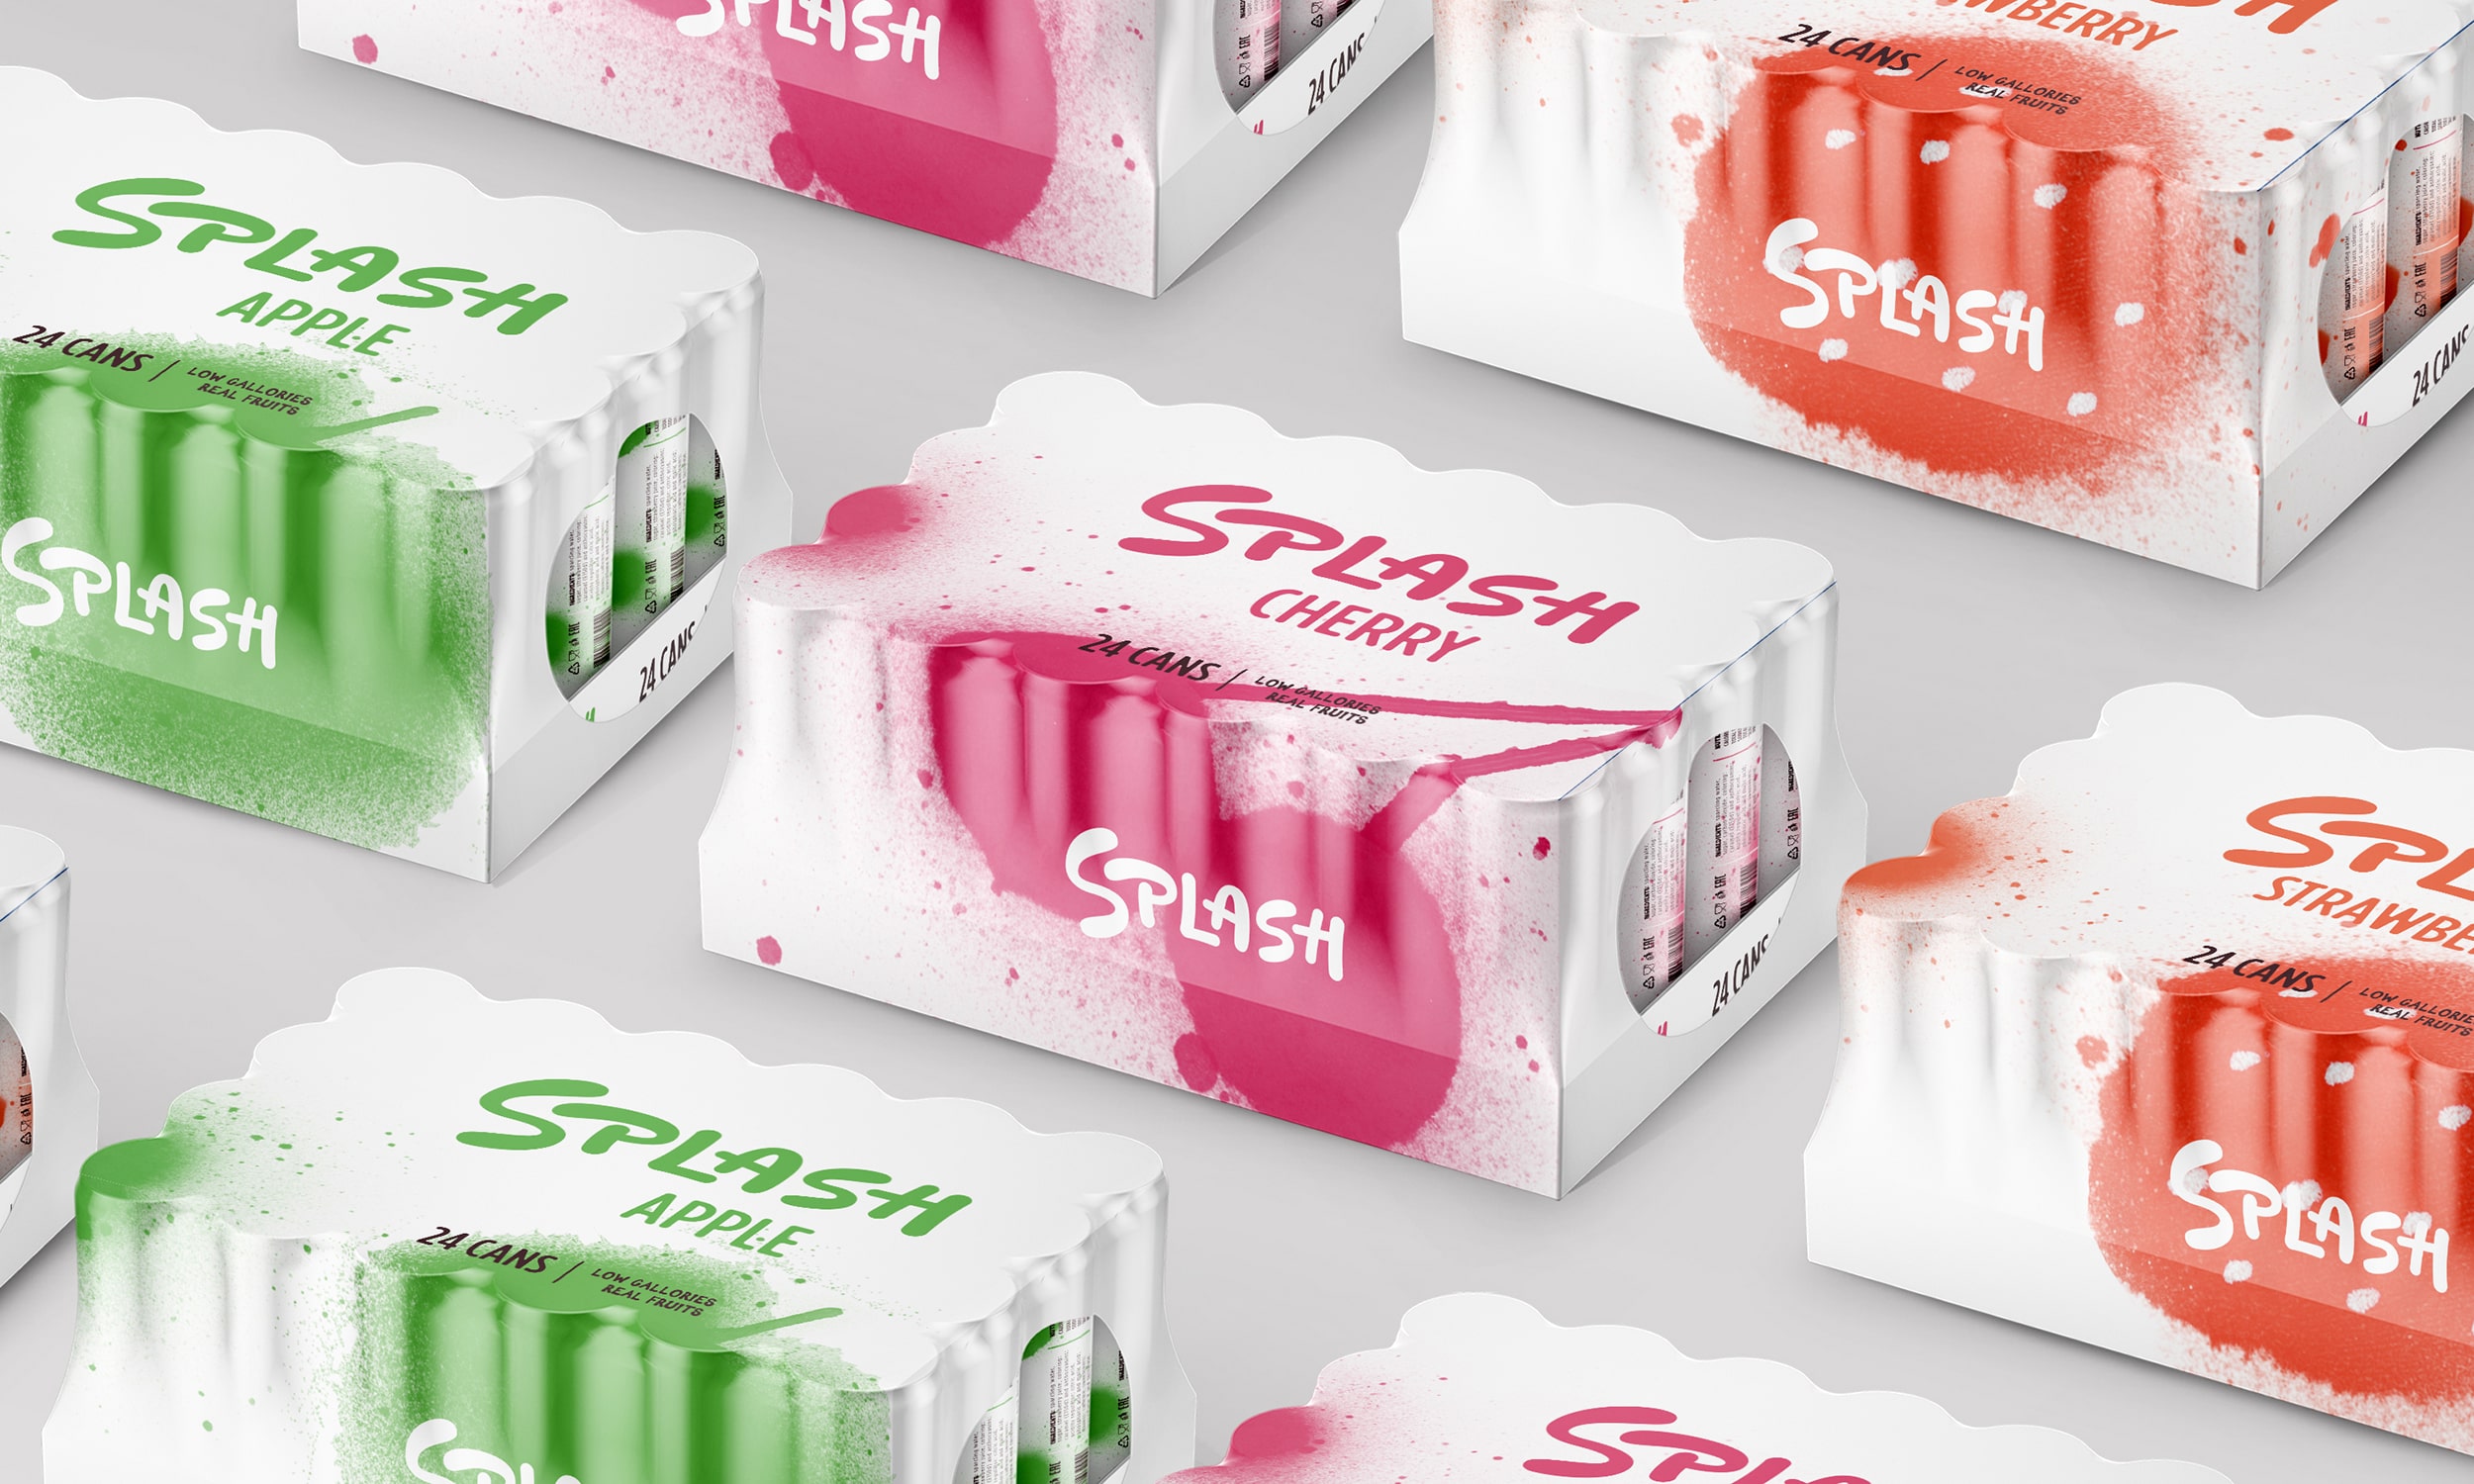 24bottles packaging by Qlab Design